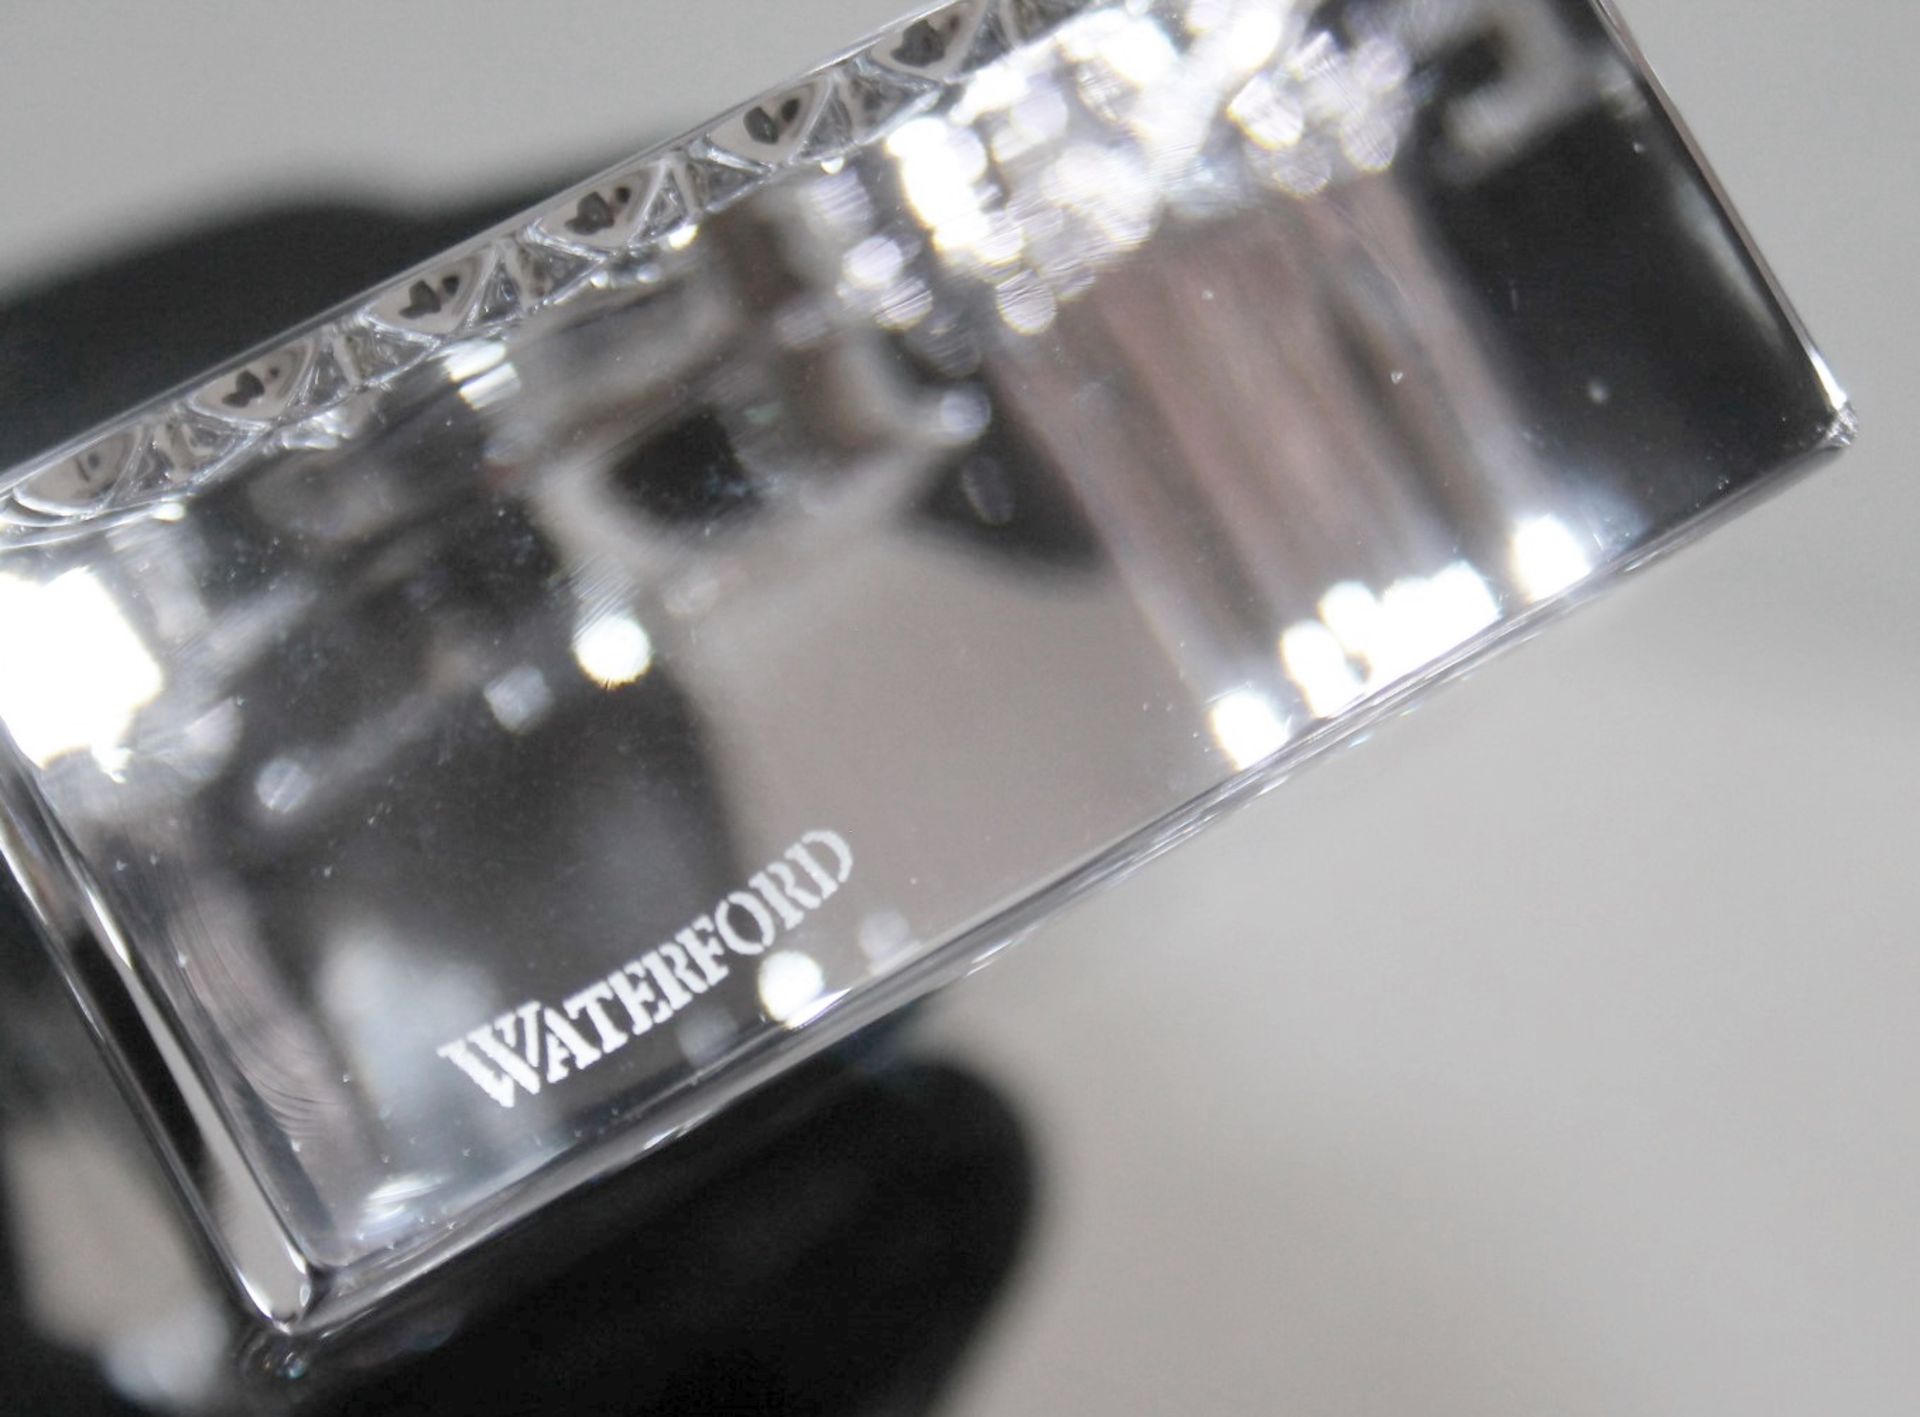 1 x WATERFORD 'Lismore' Essence Clock Mount (Crystal Section Only) - Original Price £155.00 - Unused - Image 11 of 12